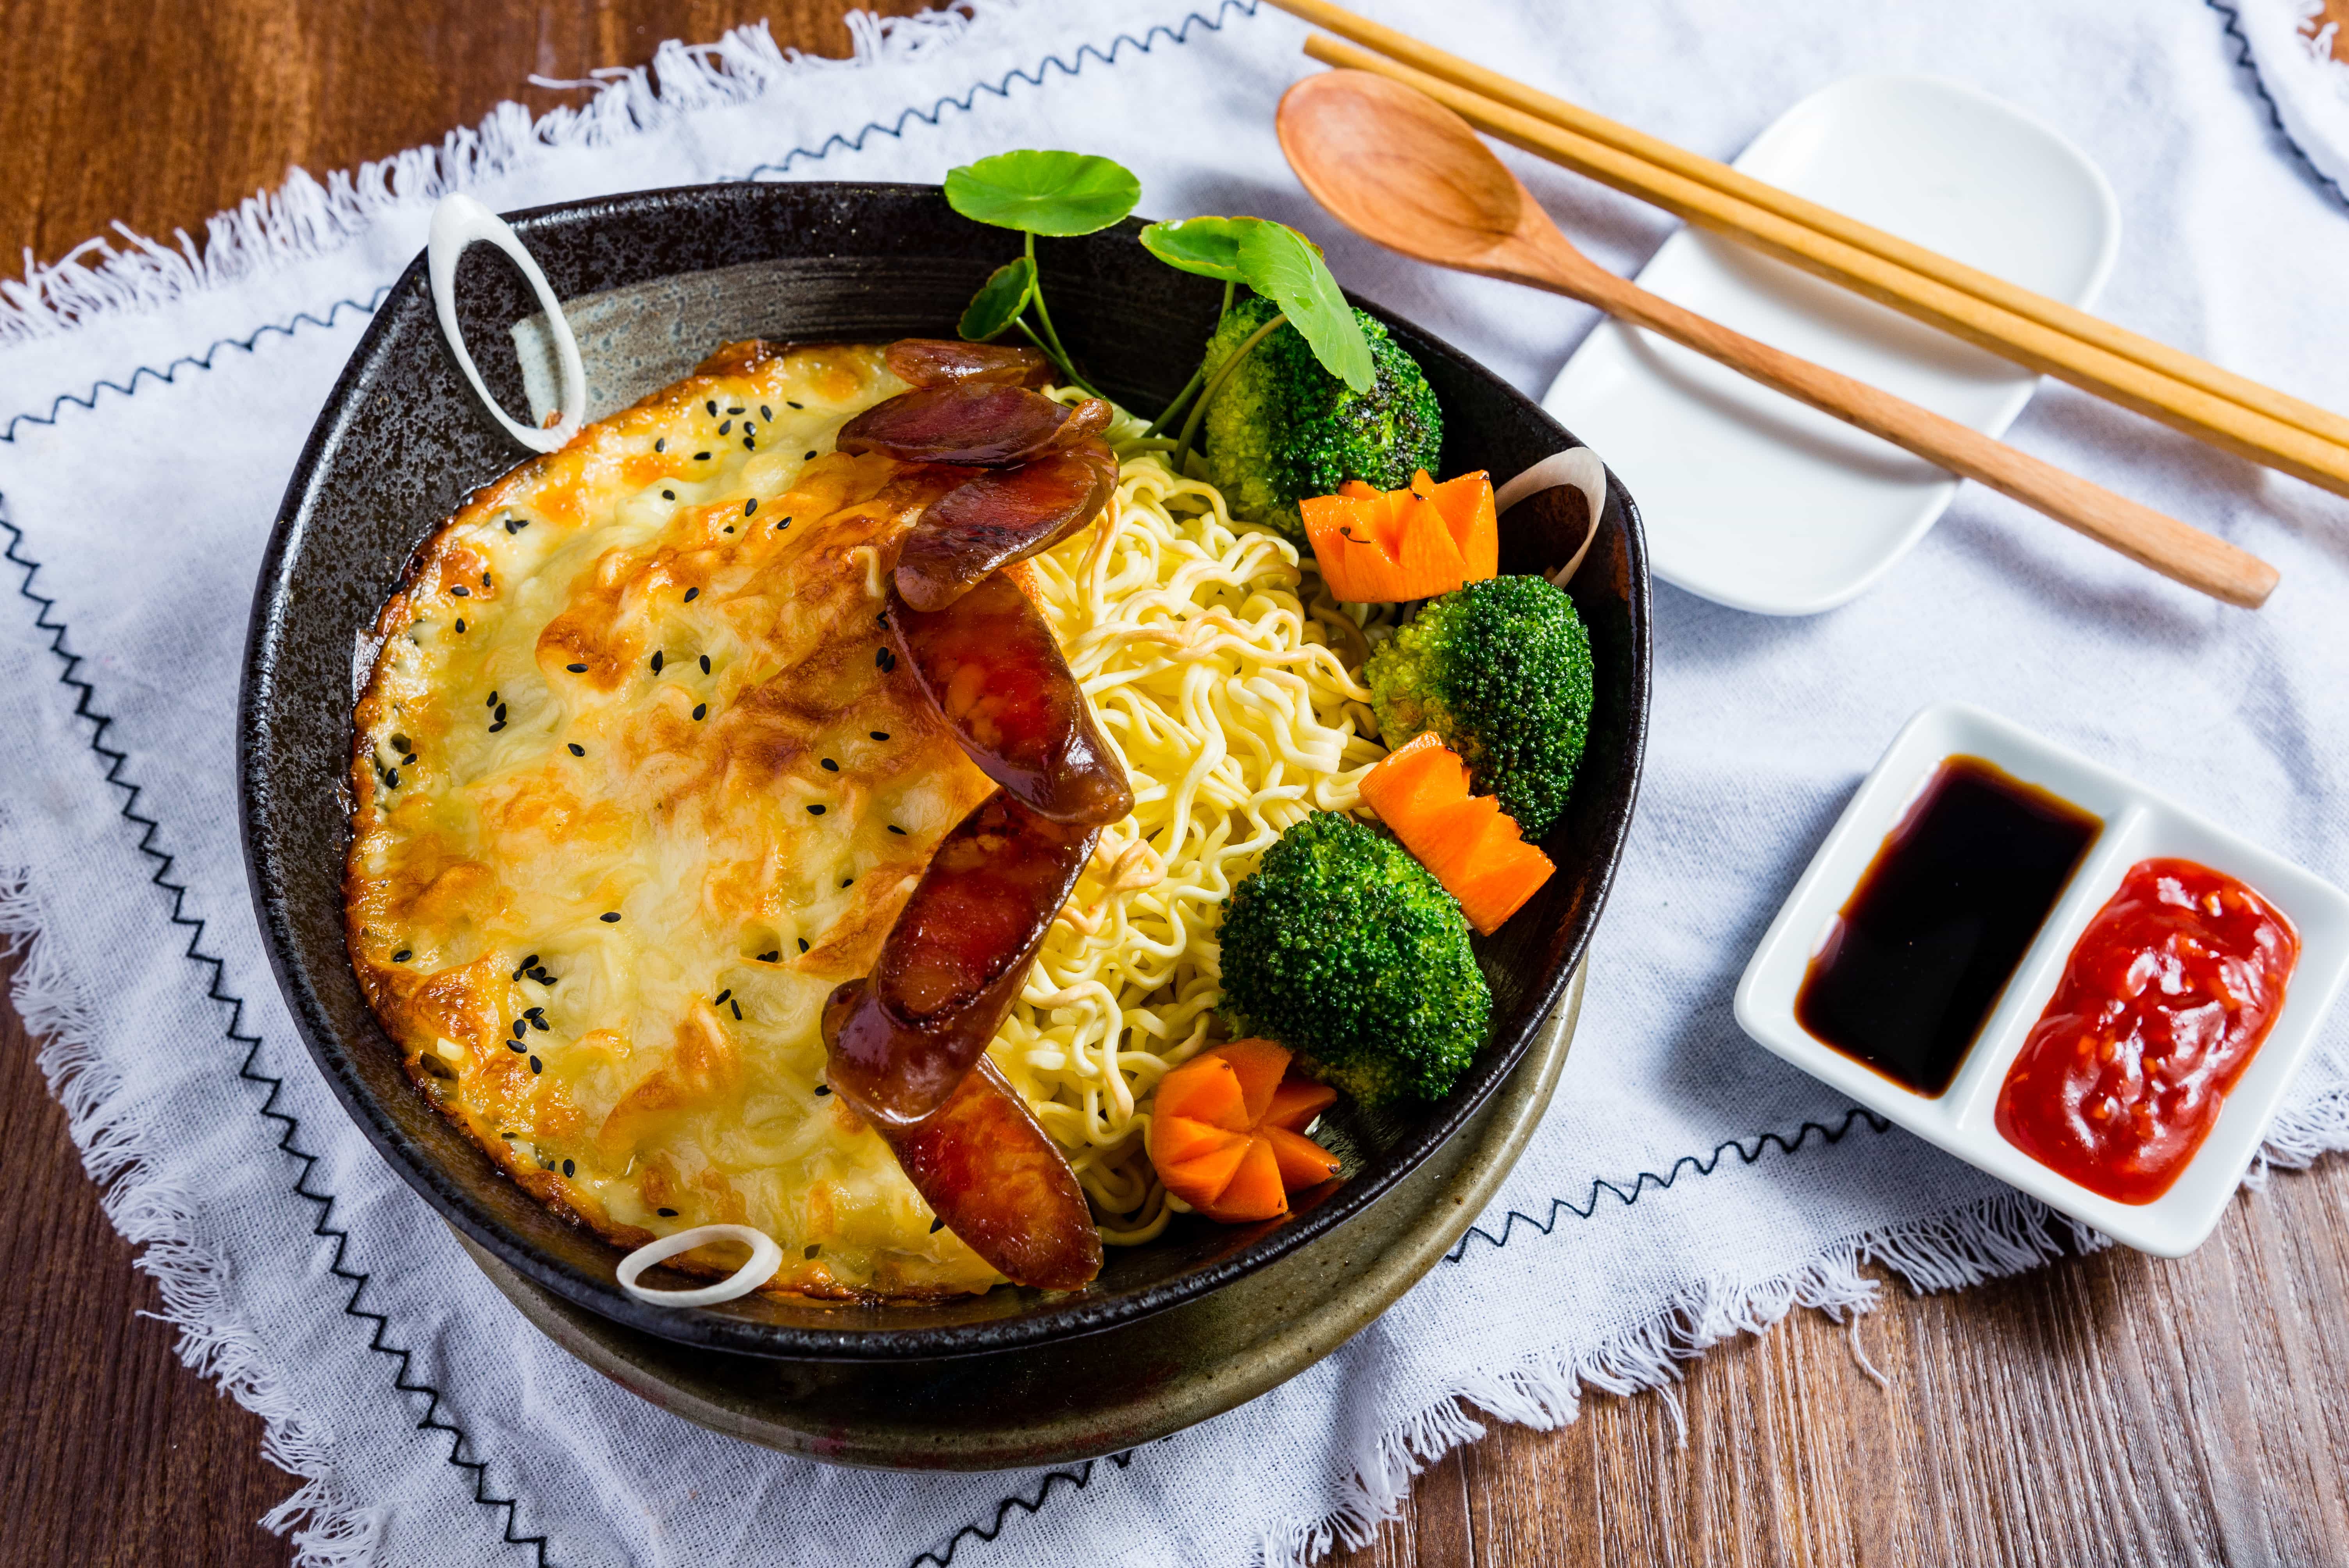 Spicy Grilled Noodles With Baked Cheese